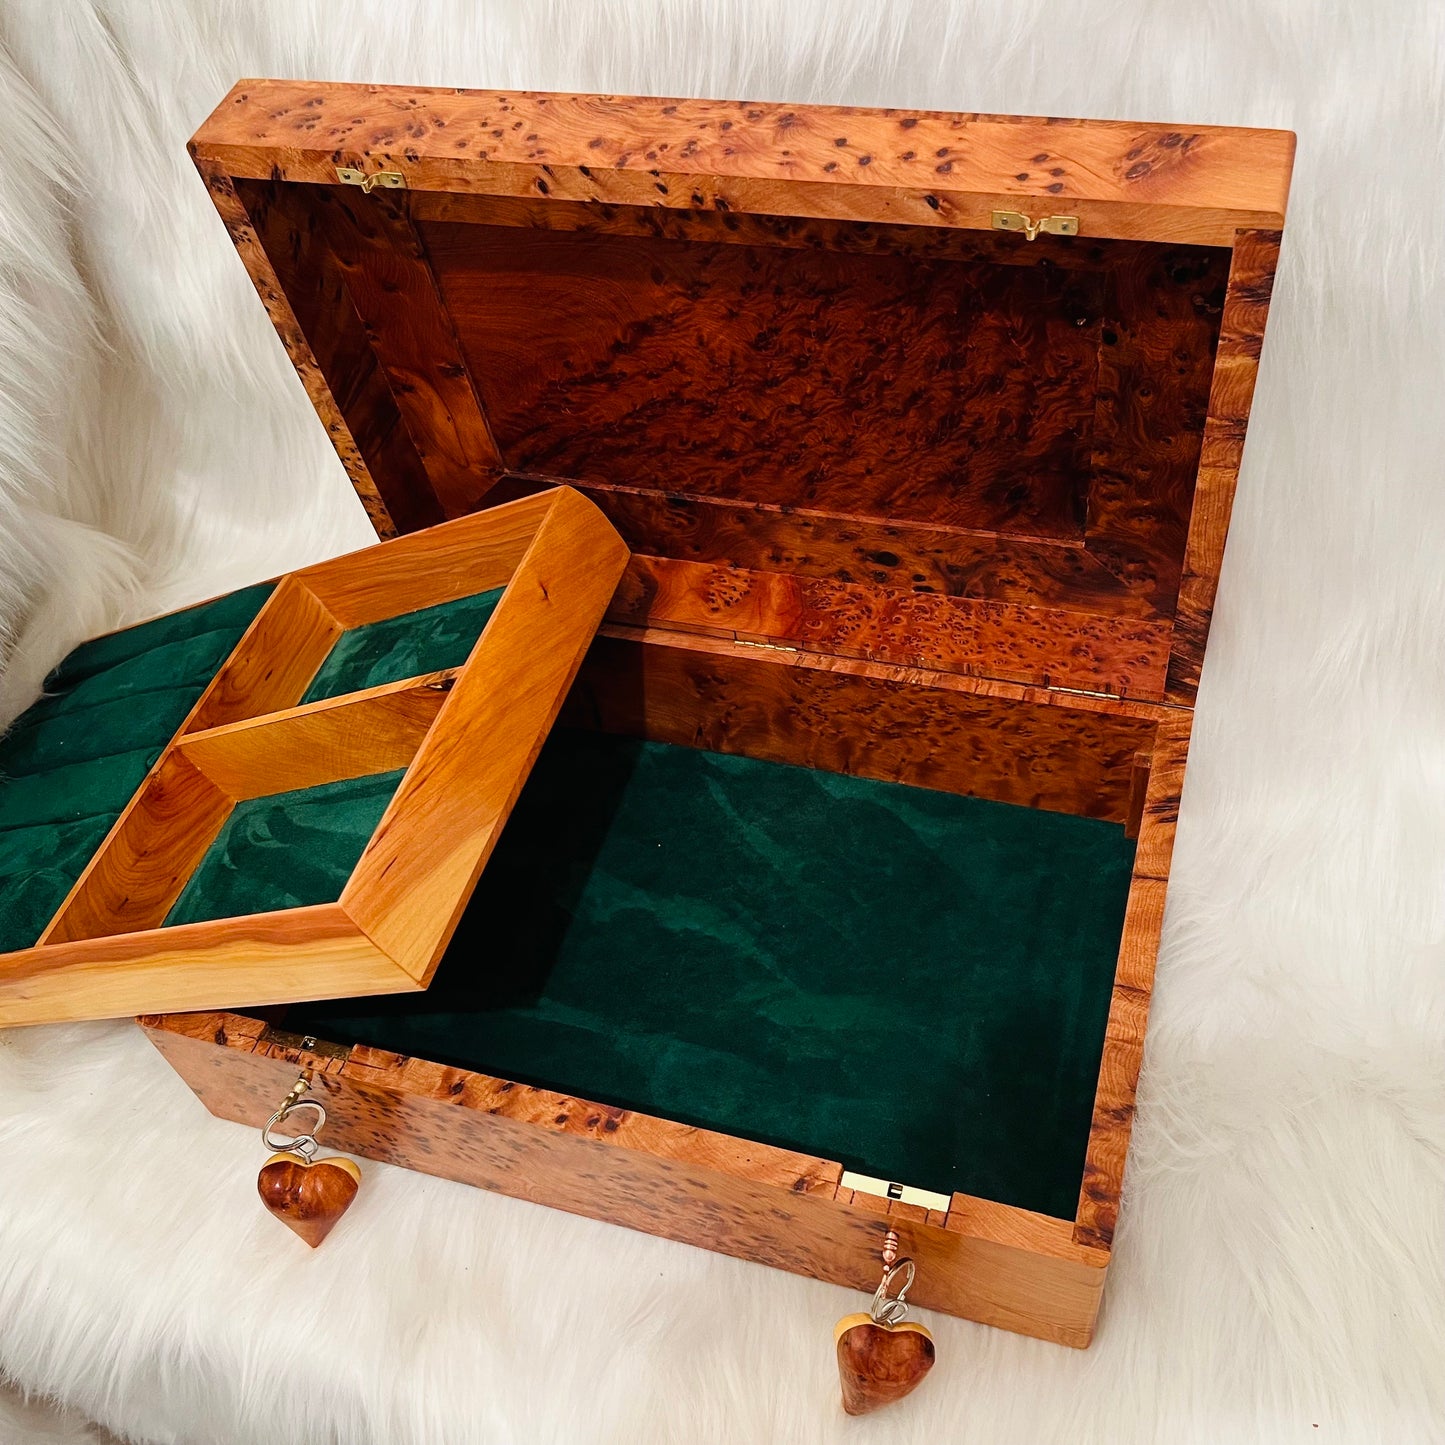 15"x10" Big Moroccan lockable Jewelry Box with Suede Leather Lining and Jewelry Cushions,Box organizer with 2 keys,wedding couple memory box